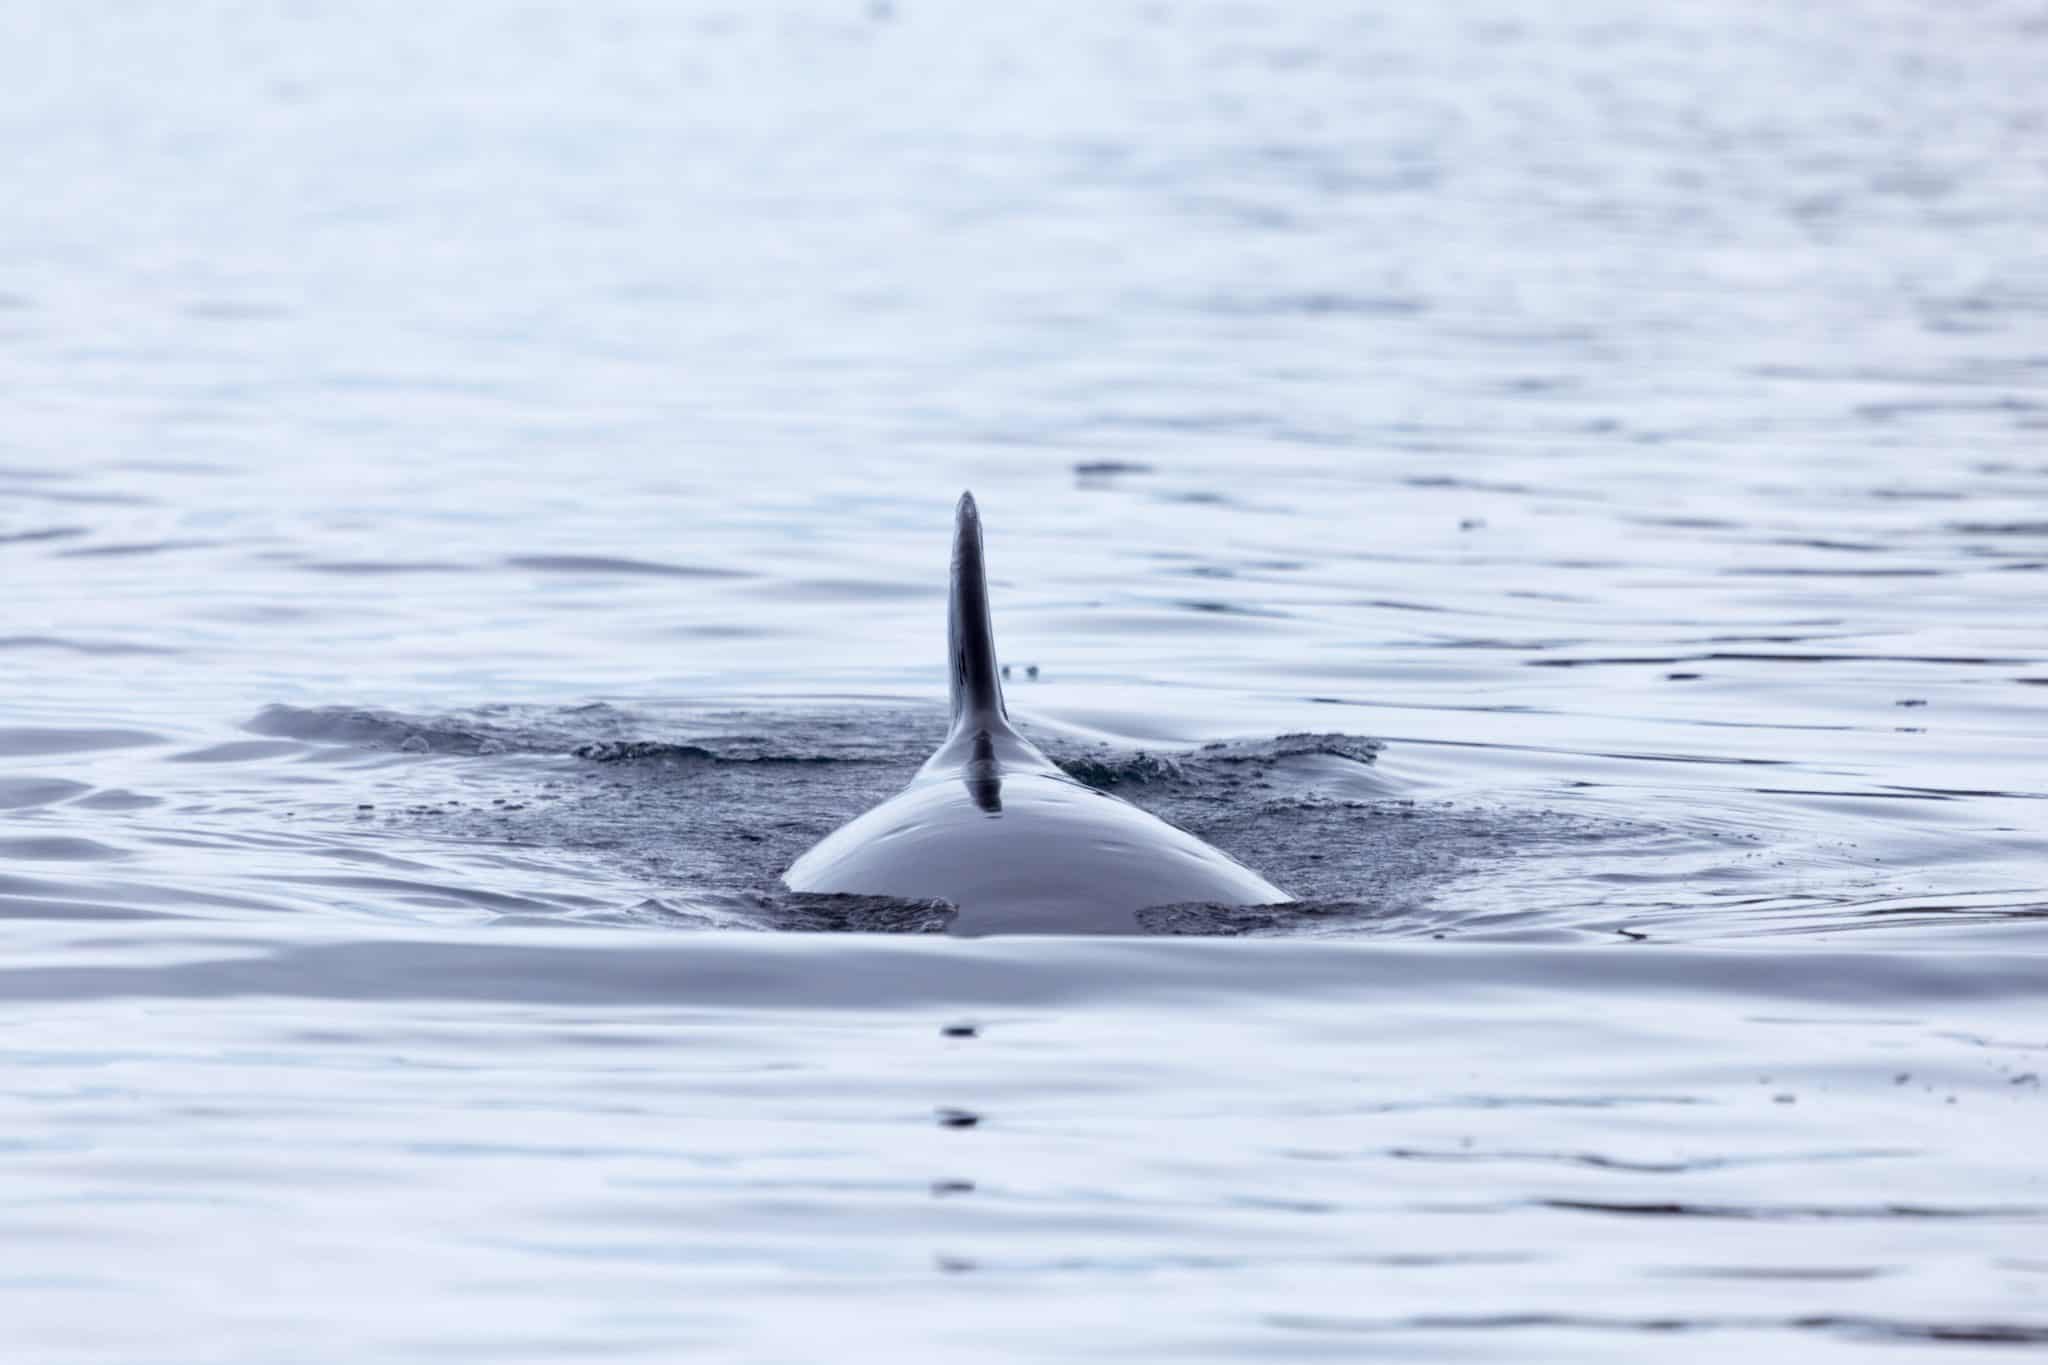 Norway Releases 2021 Hunting Quota for Over 1200 Minke Whales